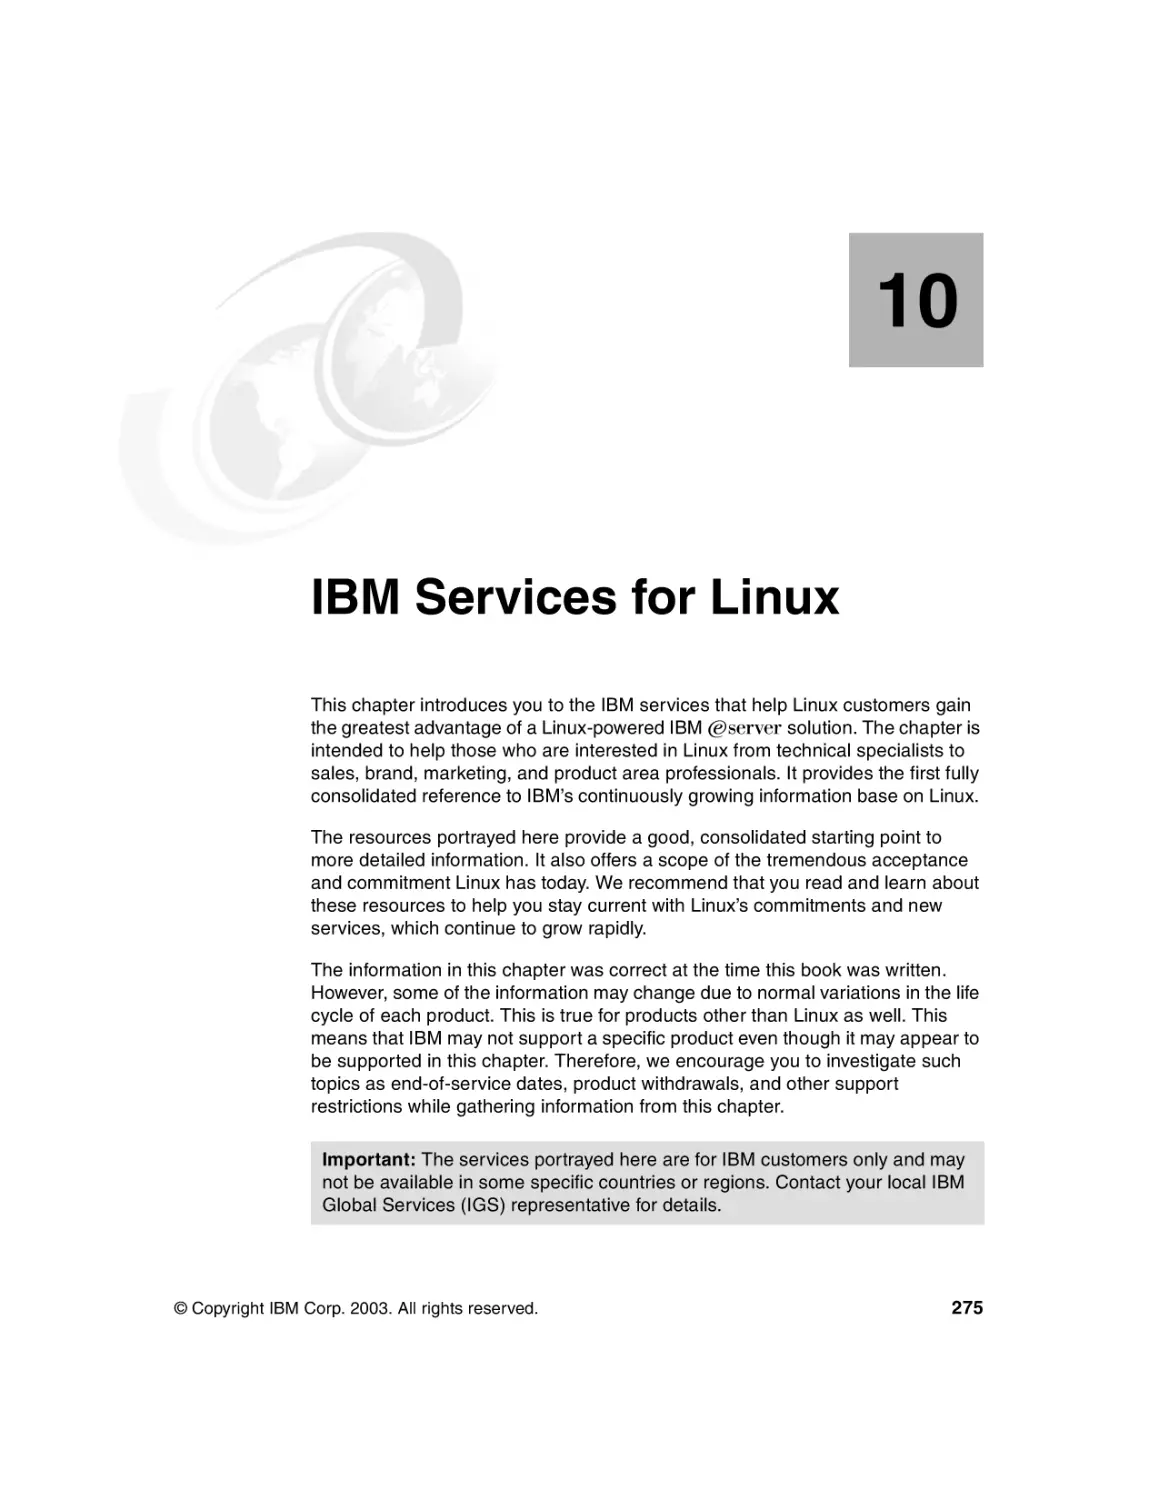 Chapter 10. IBM Services for Linux